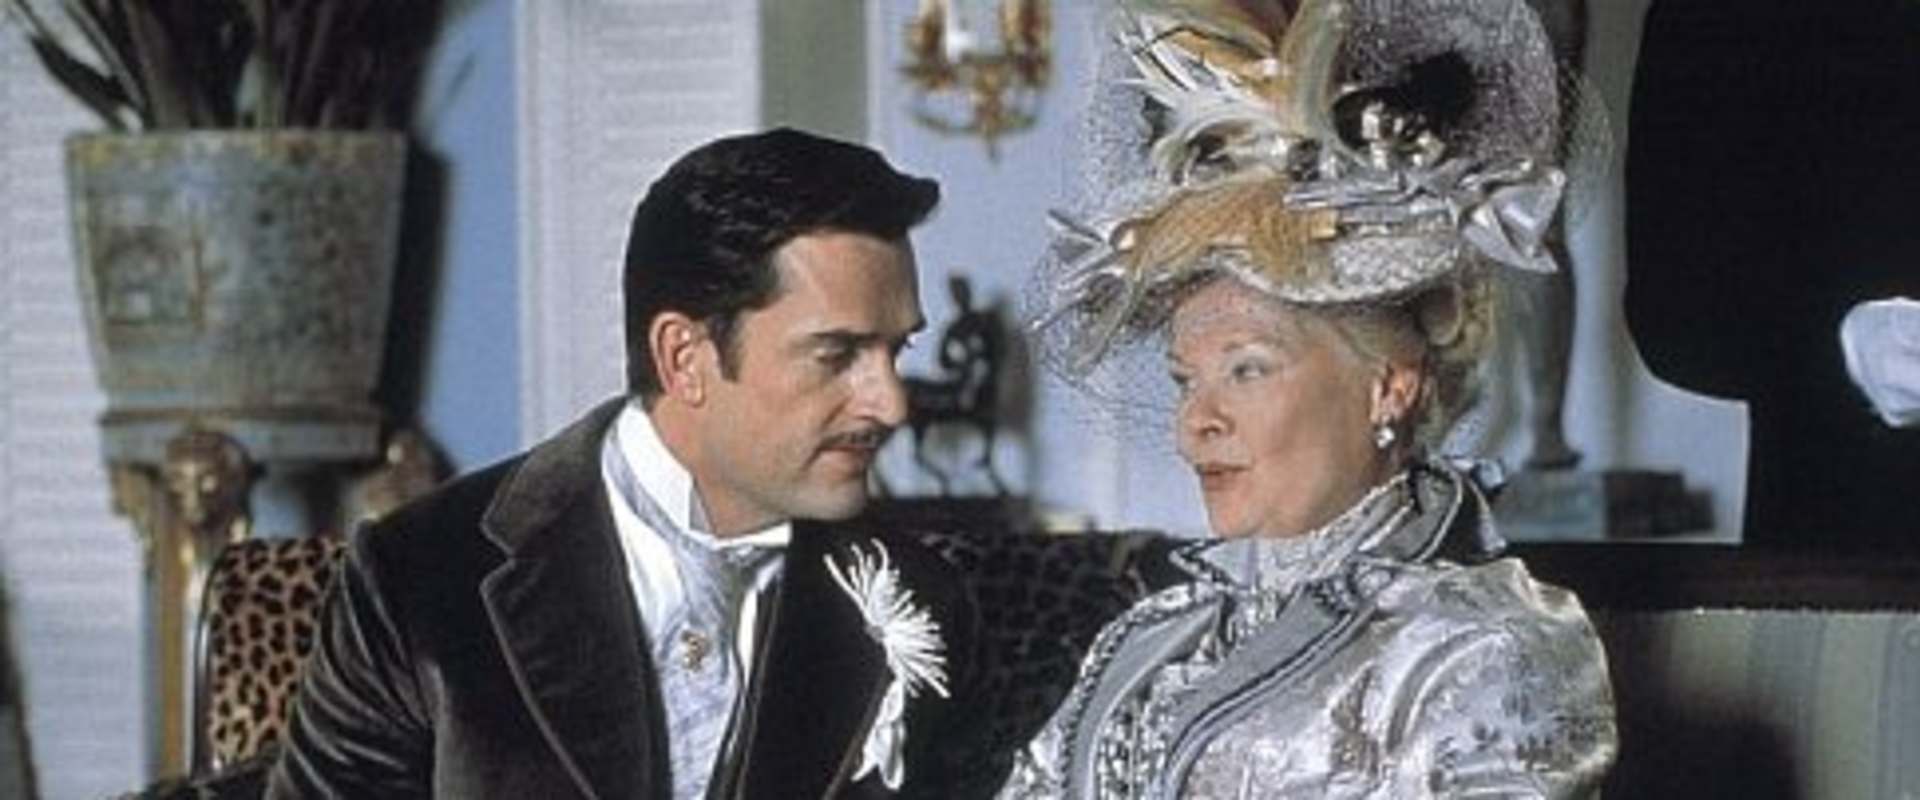 The Importance of Being Earnest background 2